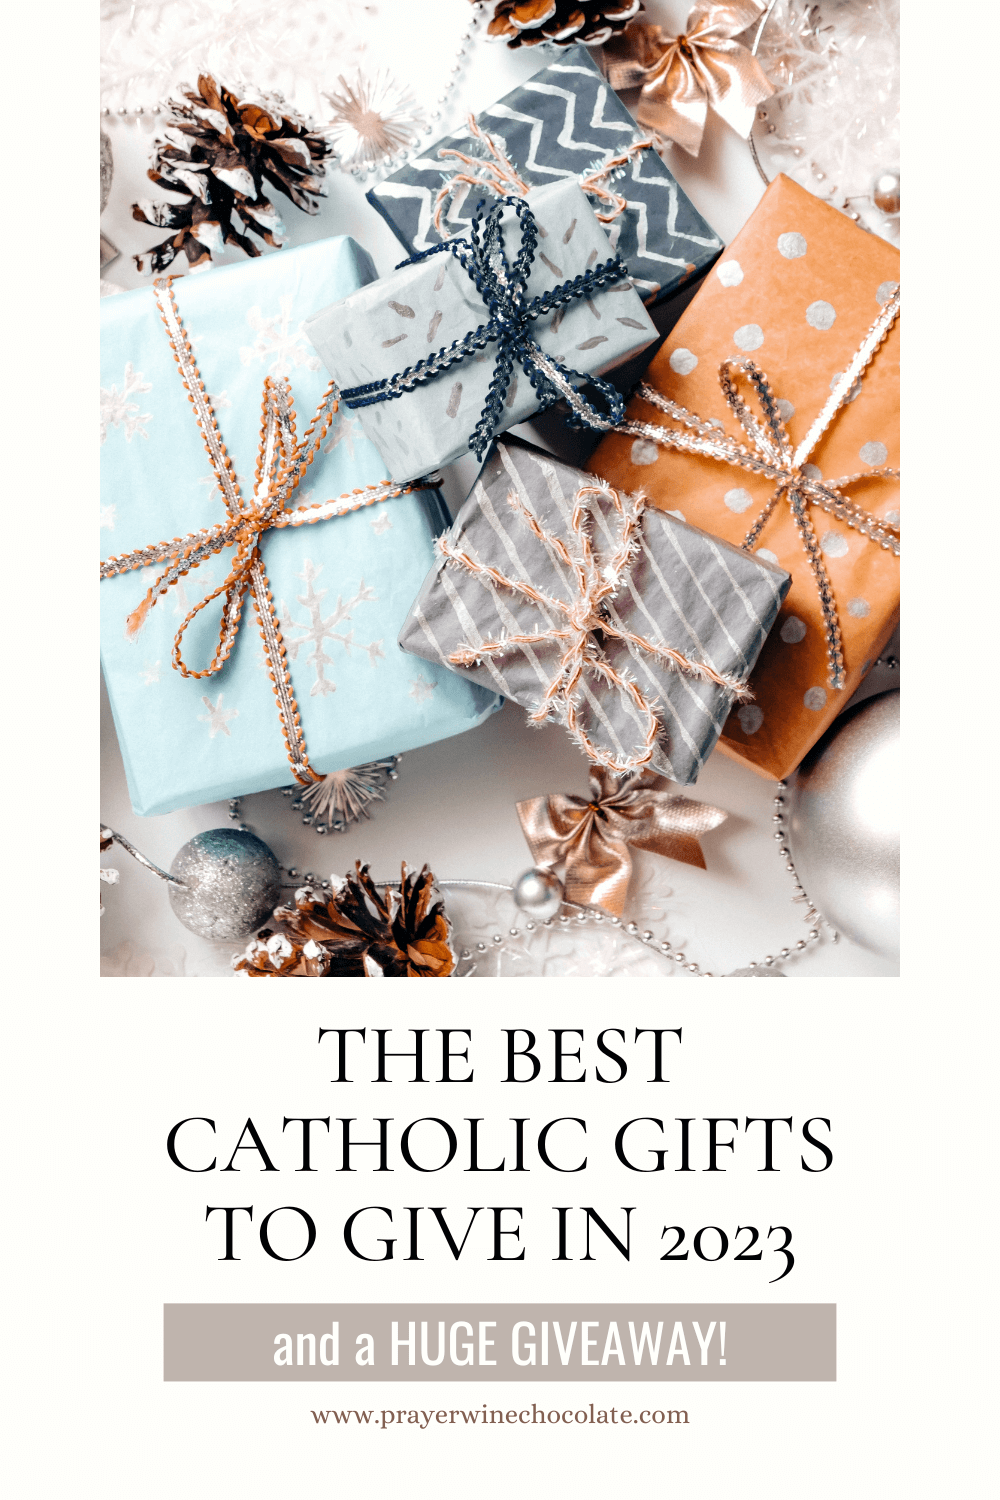 The BEST Catholic Gifts to Give in 2023 - Prayer Wine Chocolate